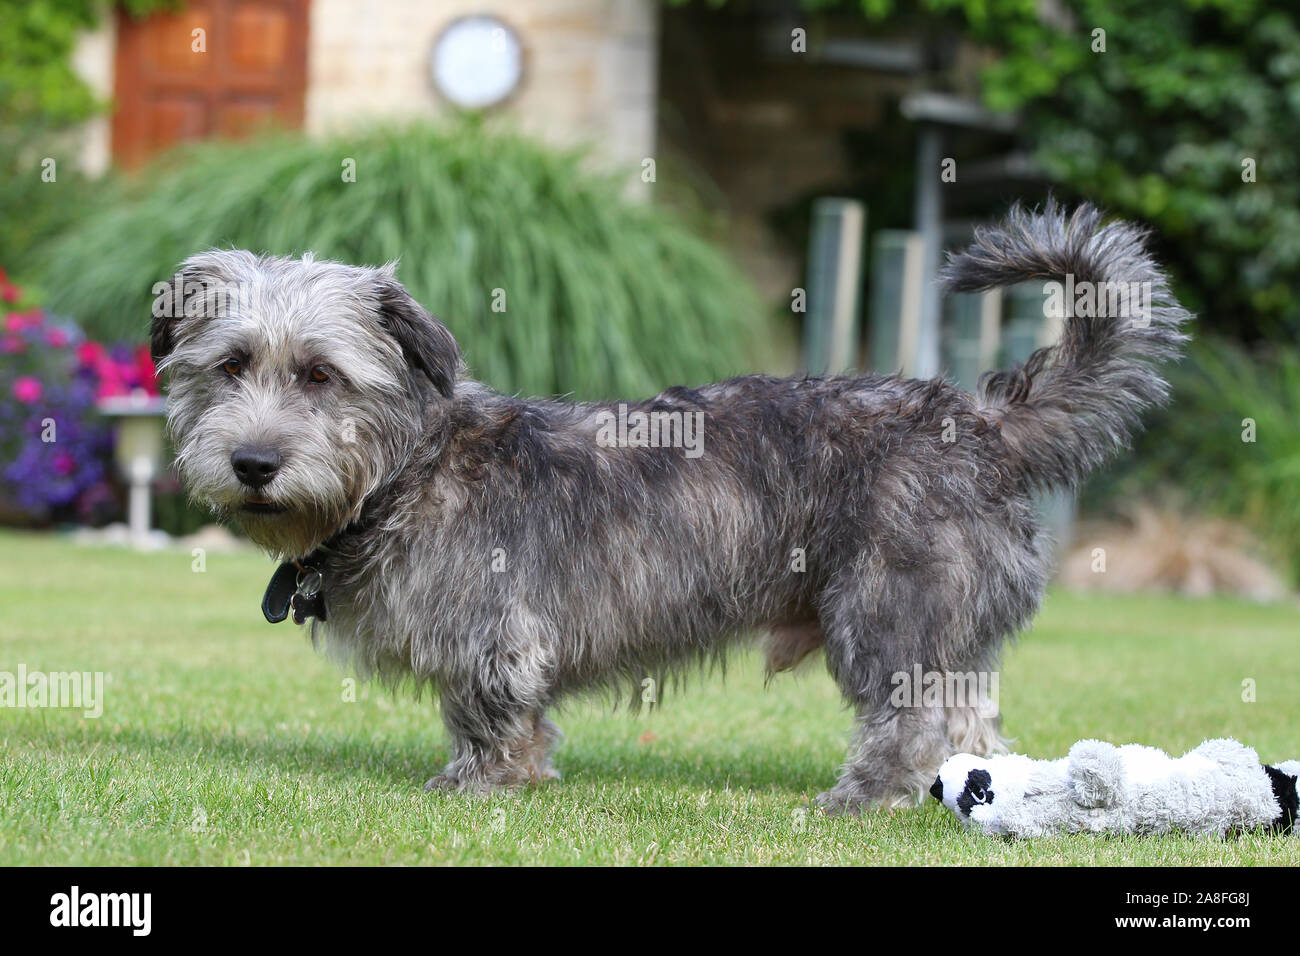 Wicklow Terrier High Resolution Stock Photography and Images - Alamy